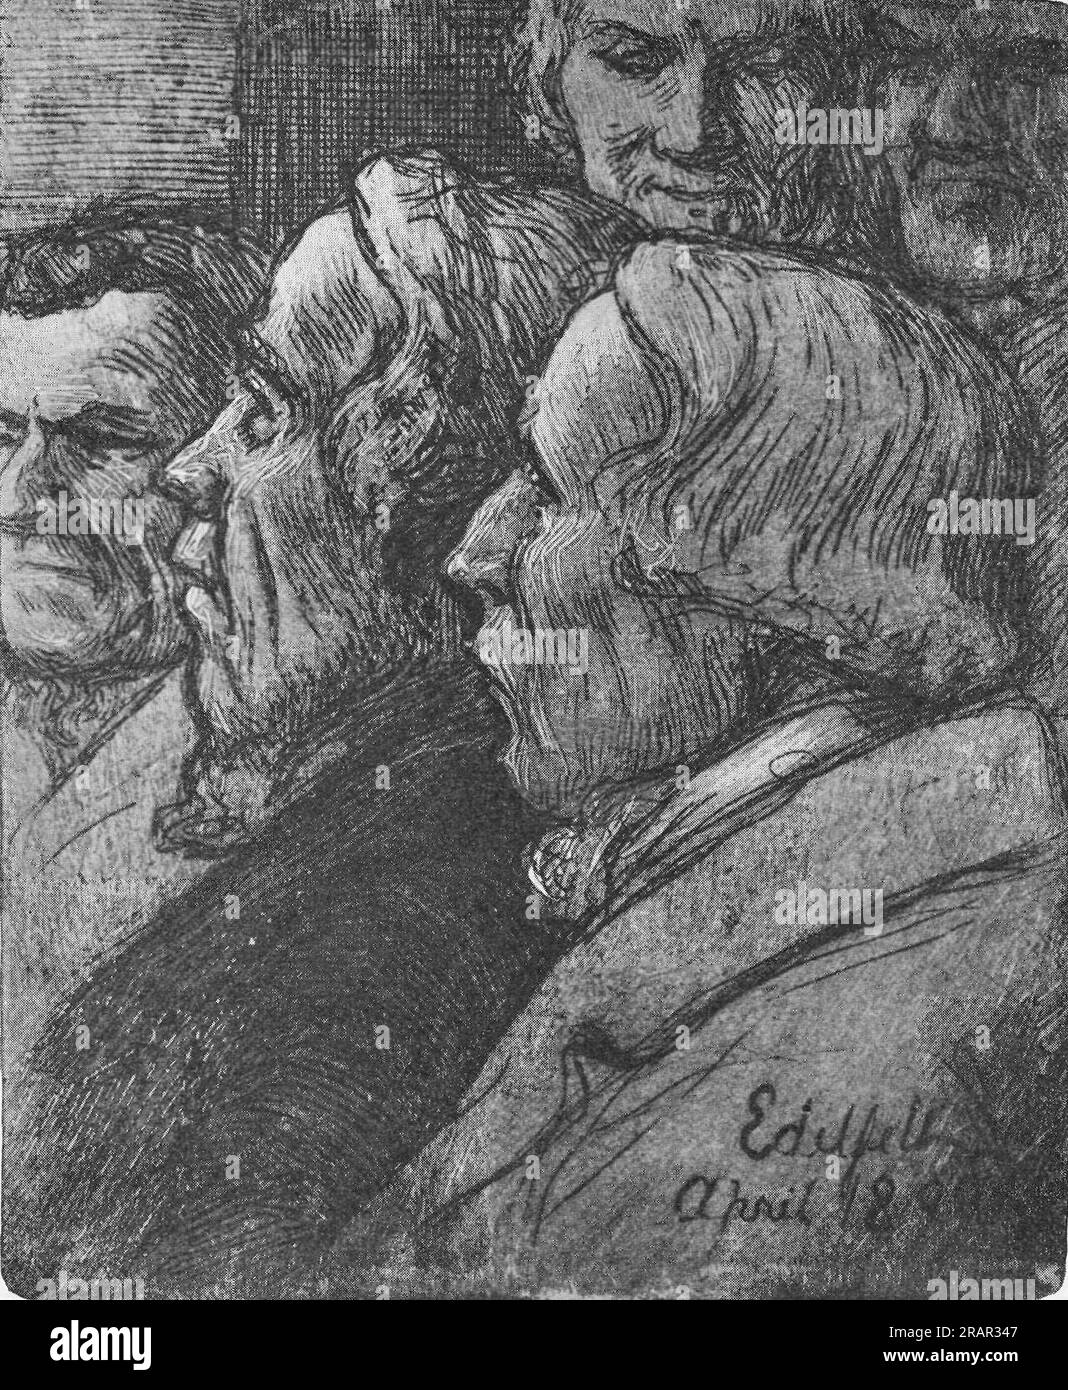 Illustration to the Great Deputation, Which Tried to Convince the Czar to Withdraw the February Manifesto Which Strove to Russify Finland by Albert Edelfelt Stock Photo